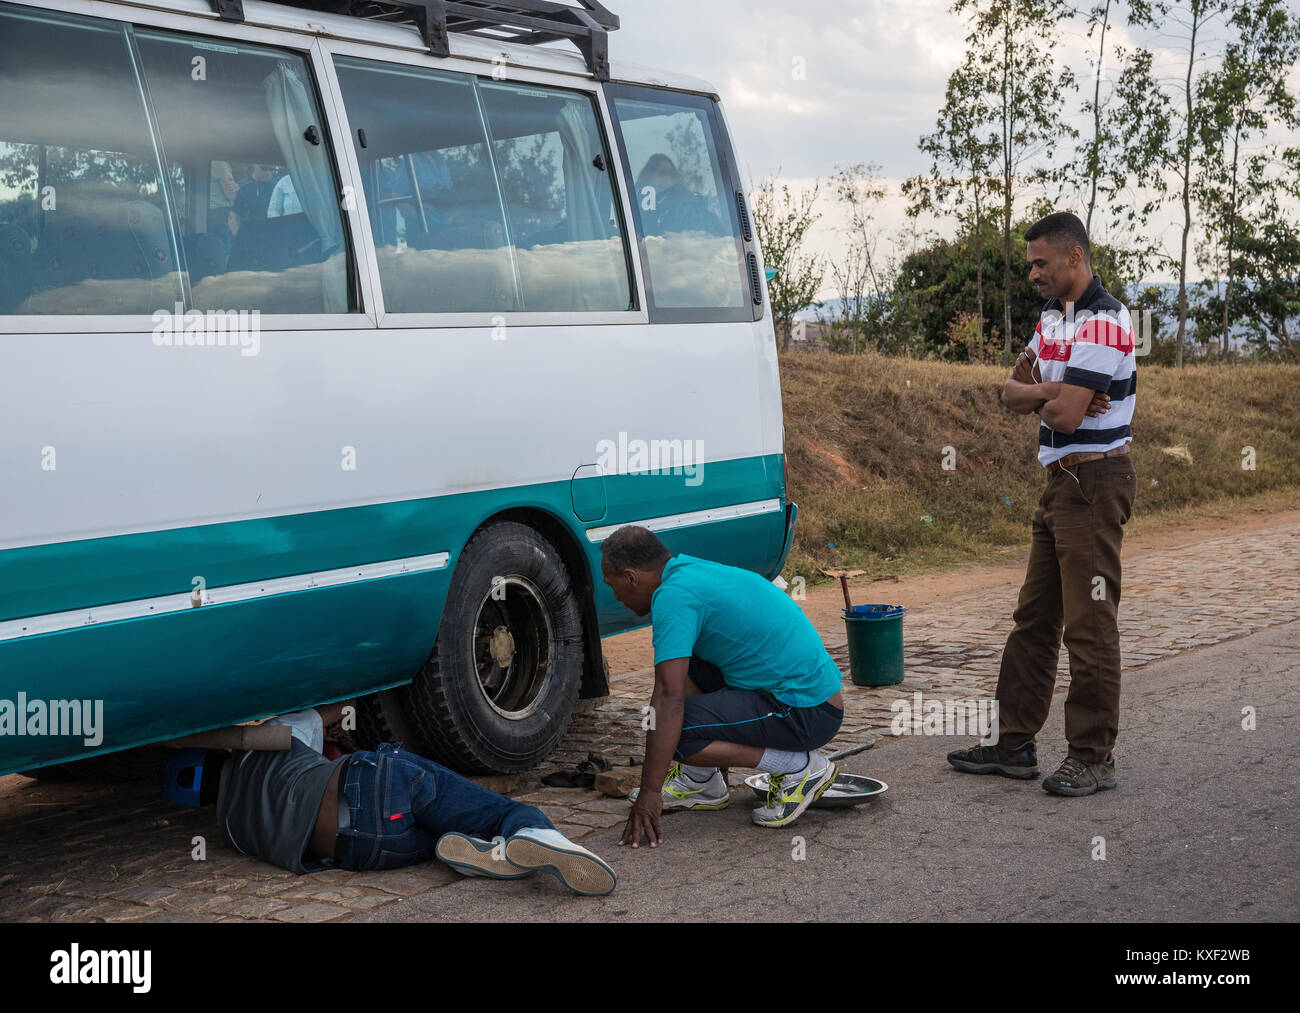 A man is under a minibus, trying to fix a flat tire, on the side of road. Madagascar, Africa. Stock Photo